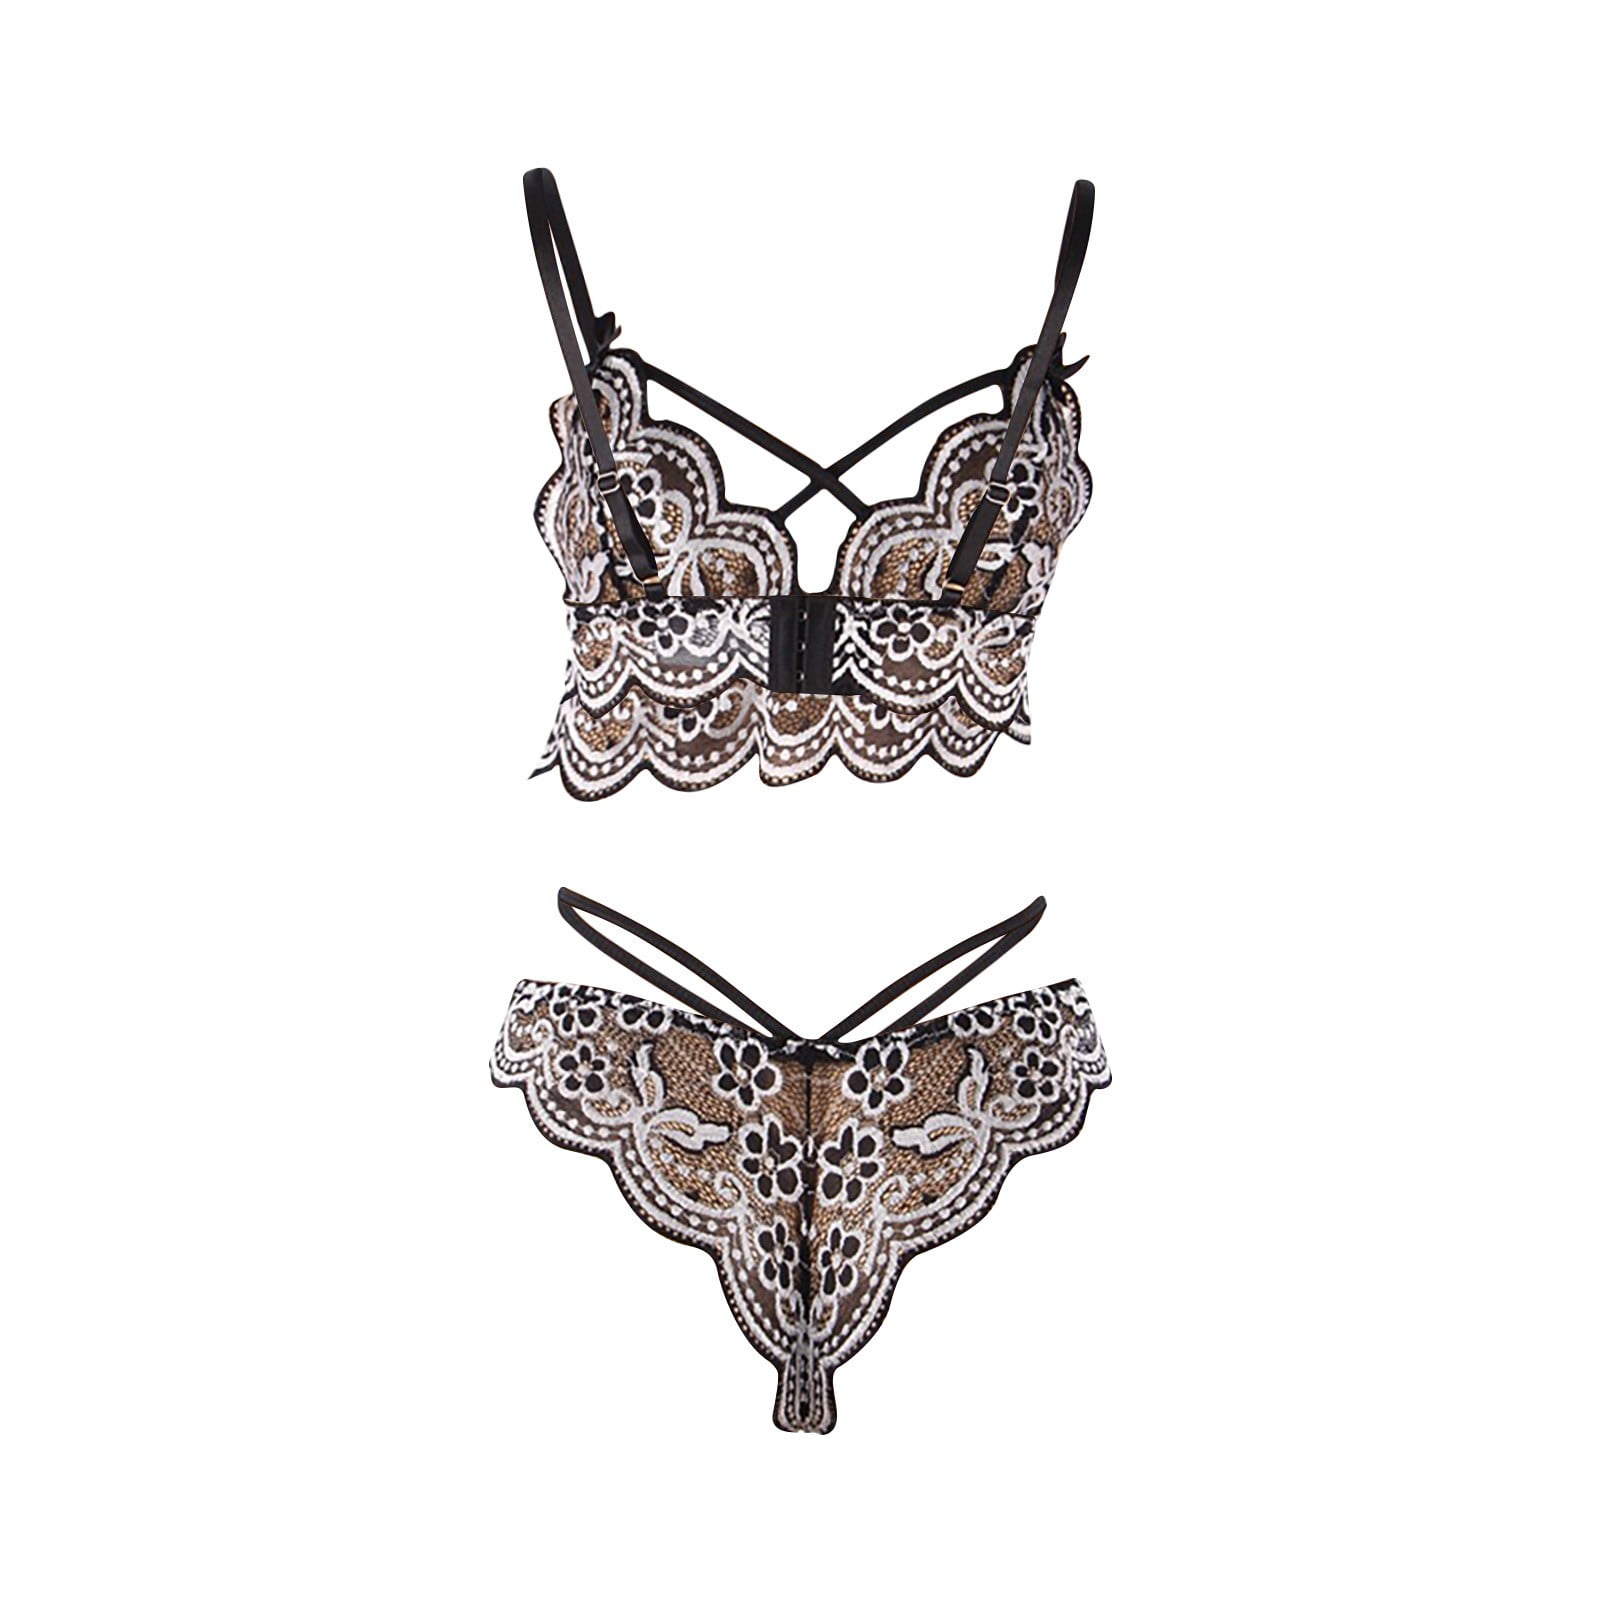 Women's Bra and Panties Lace Snap Exotic Two-piece Set Negligee Sexy  Lingerie Strappy Naughty Play Underwear Suit